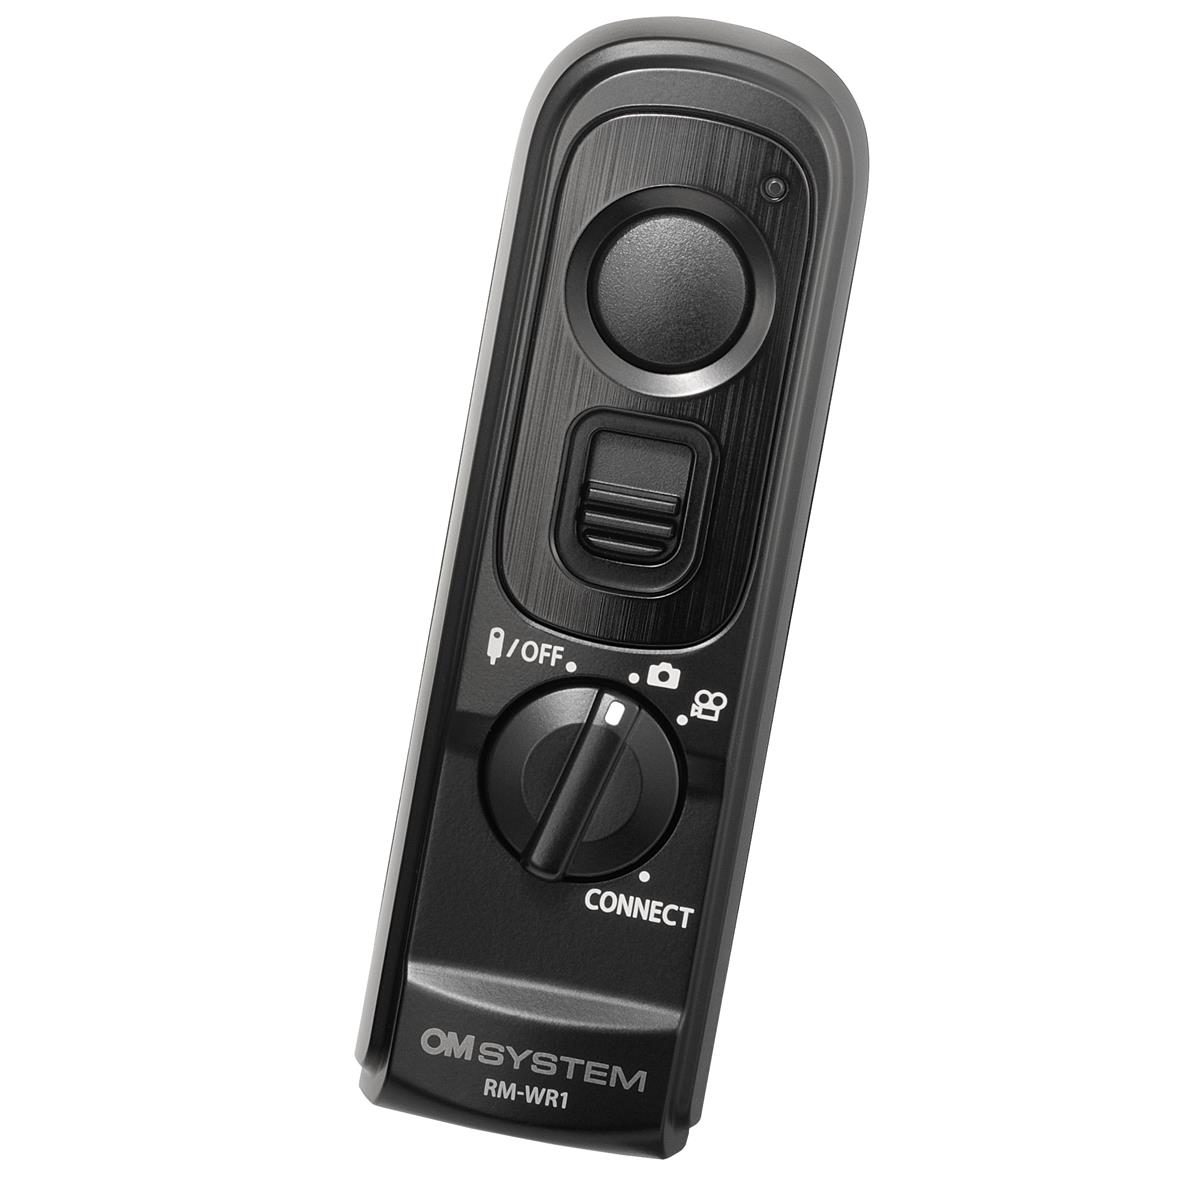 Image of OM SYSTEM RM-WR1 Wireless Remote Control for OM-1 Camera